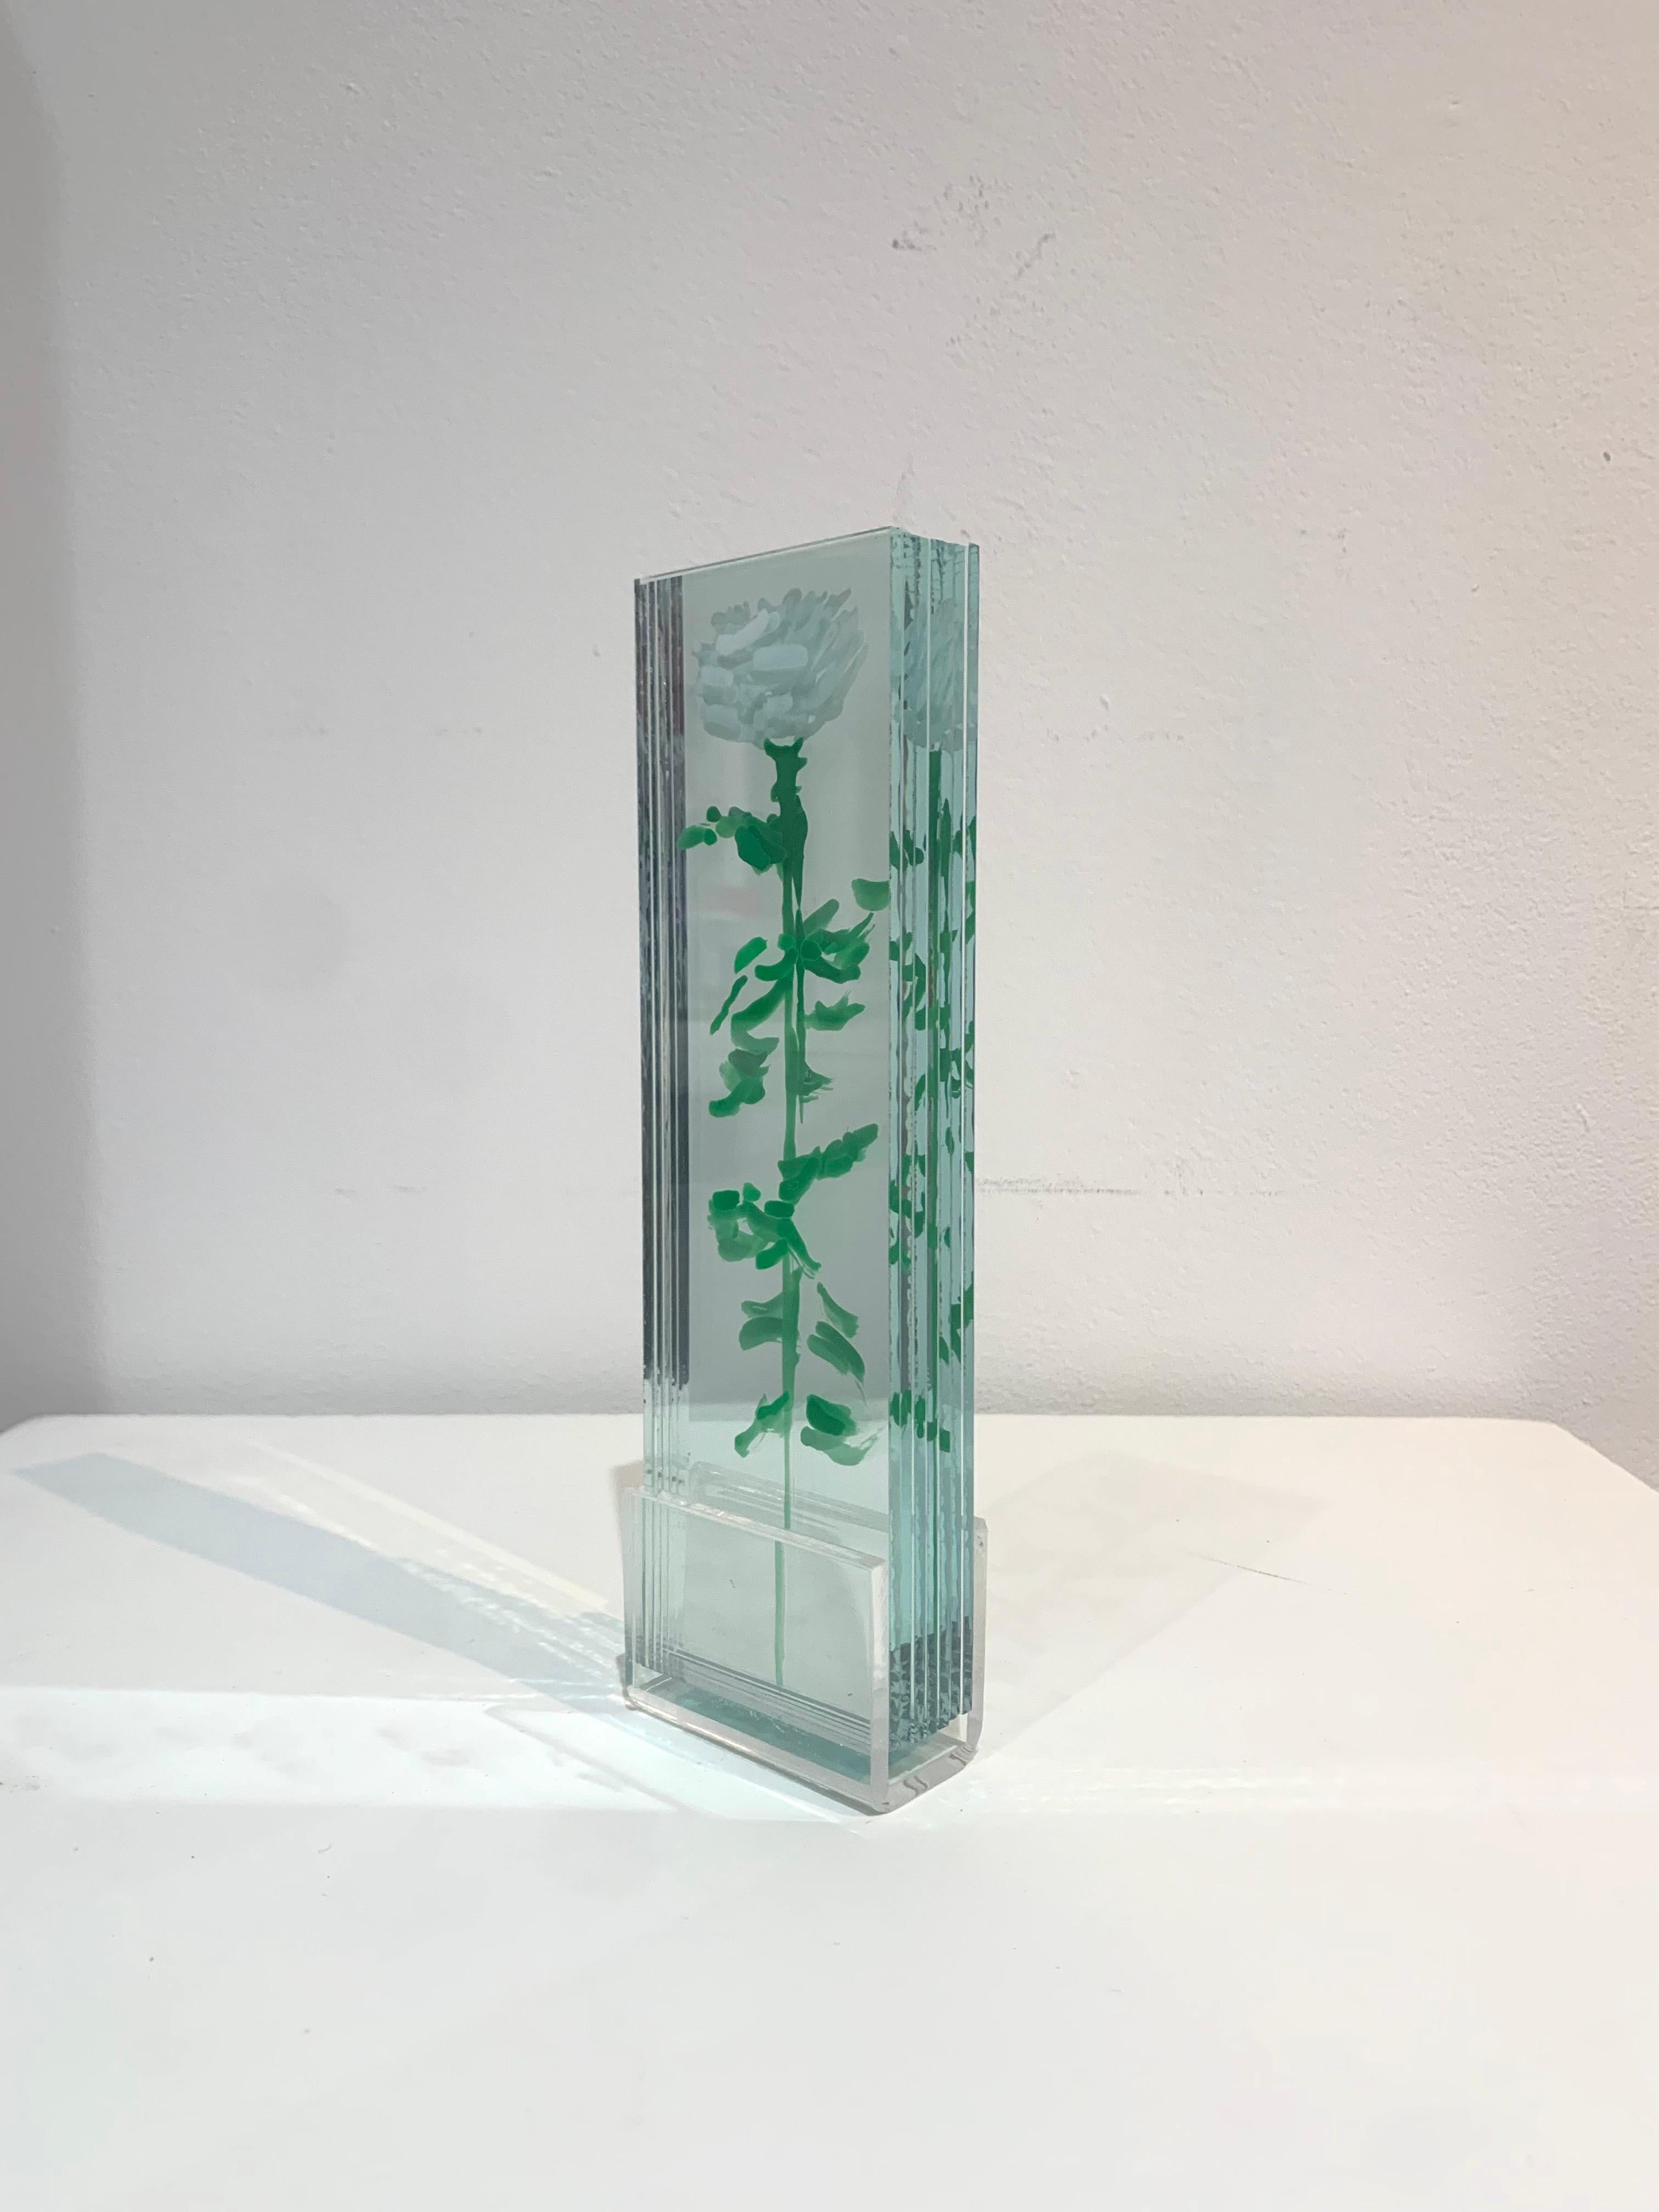 A sculpture made with glass layers and painted with nail polish and acrylic, set on an acrylic pedestal. 
The glass leaves are separated by slits on the pedestal and give the sculpture an extraordinary three-dimensional volume.

With the distinctive